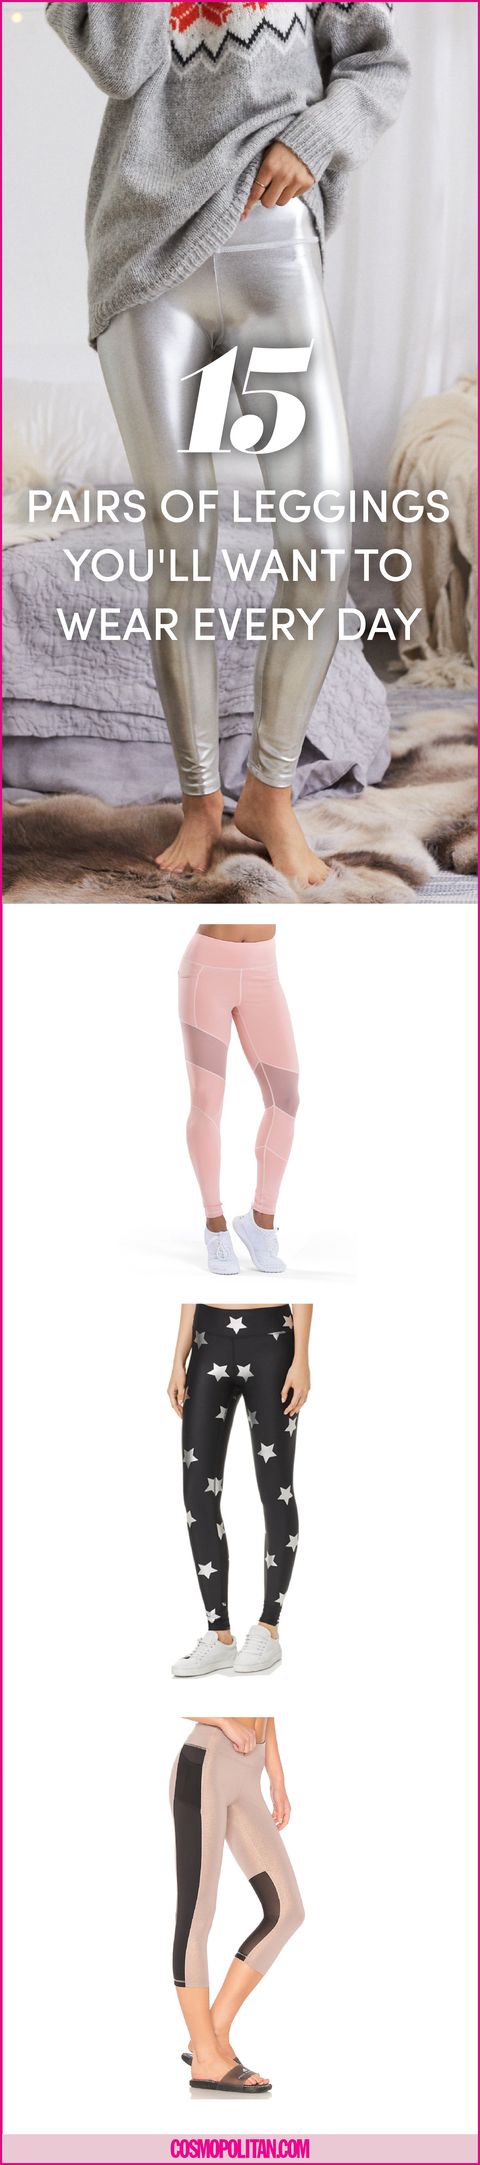 Clothing, Leggings, Jeans, Waist, Tights, Pink, Leg, Trousers, Sportswear, Active pants, 